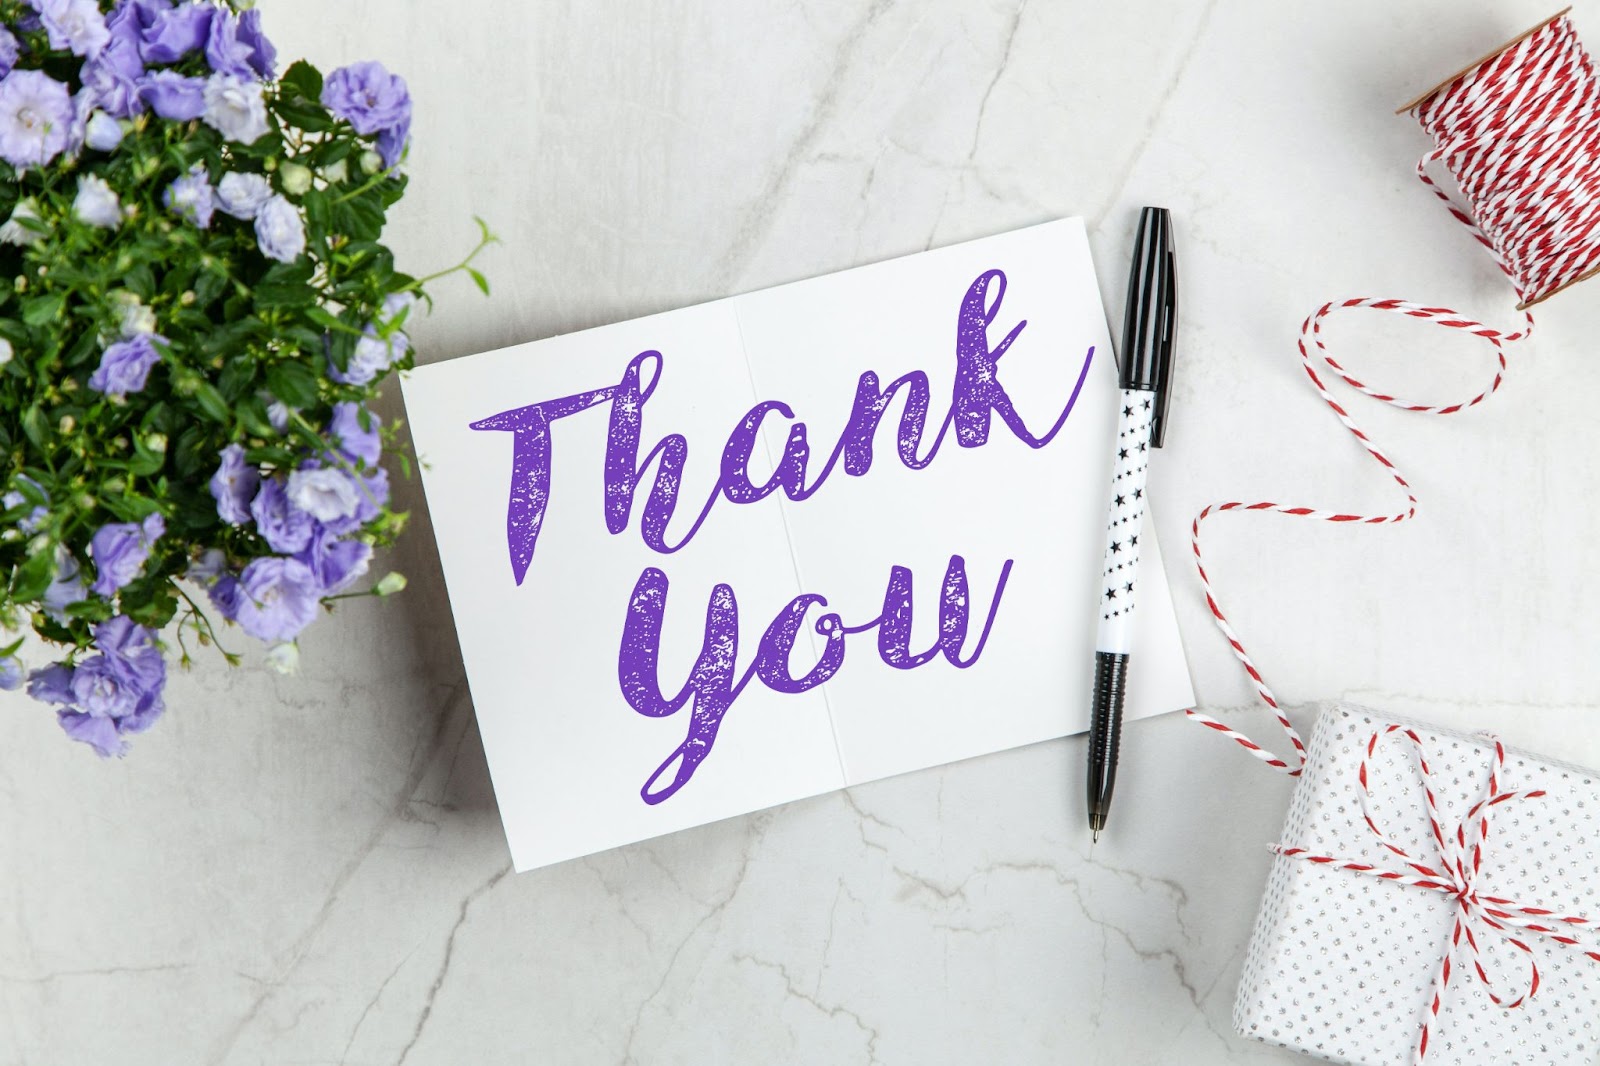 A Thank You Note Along With Flowers And Gift